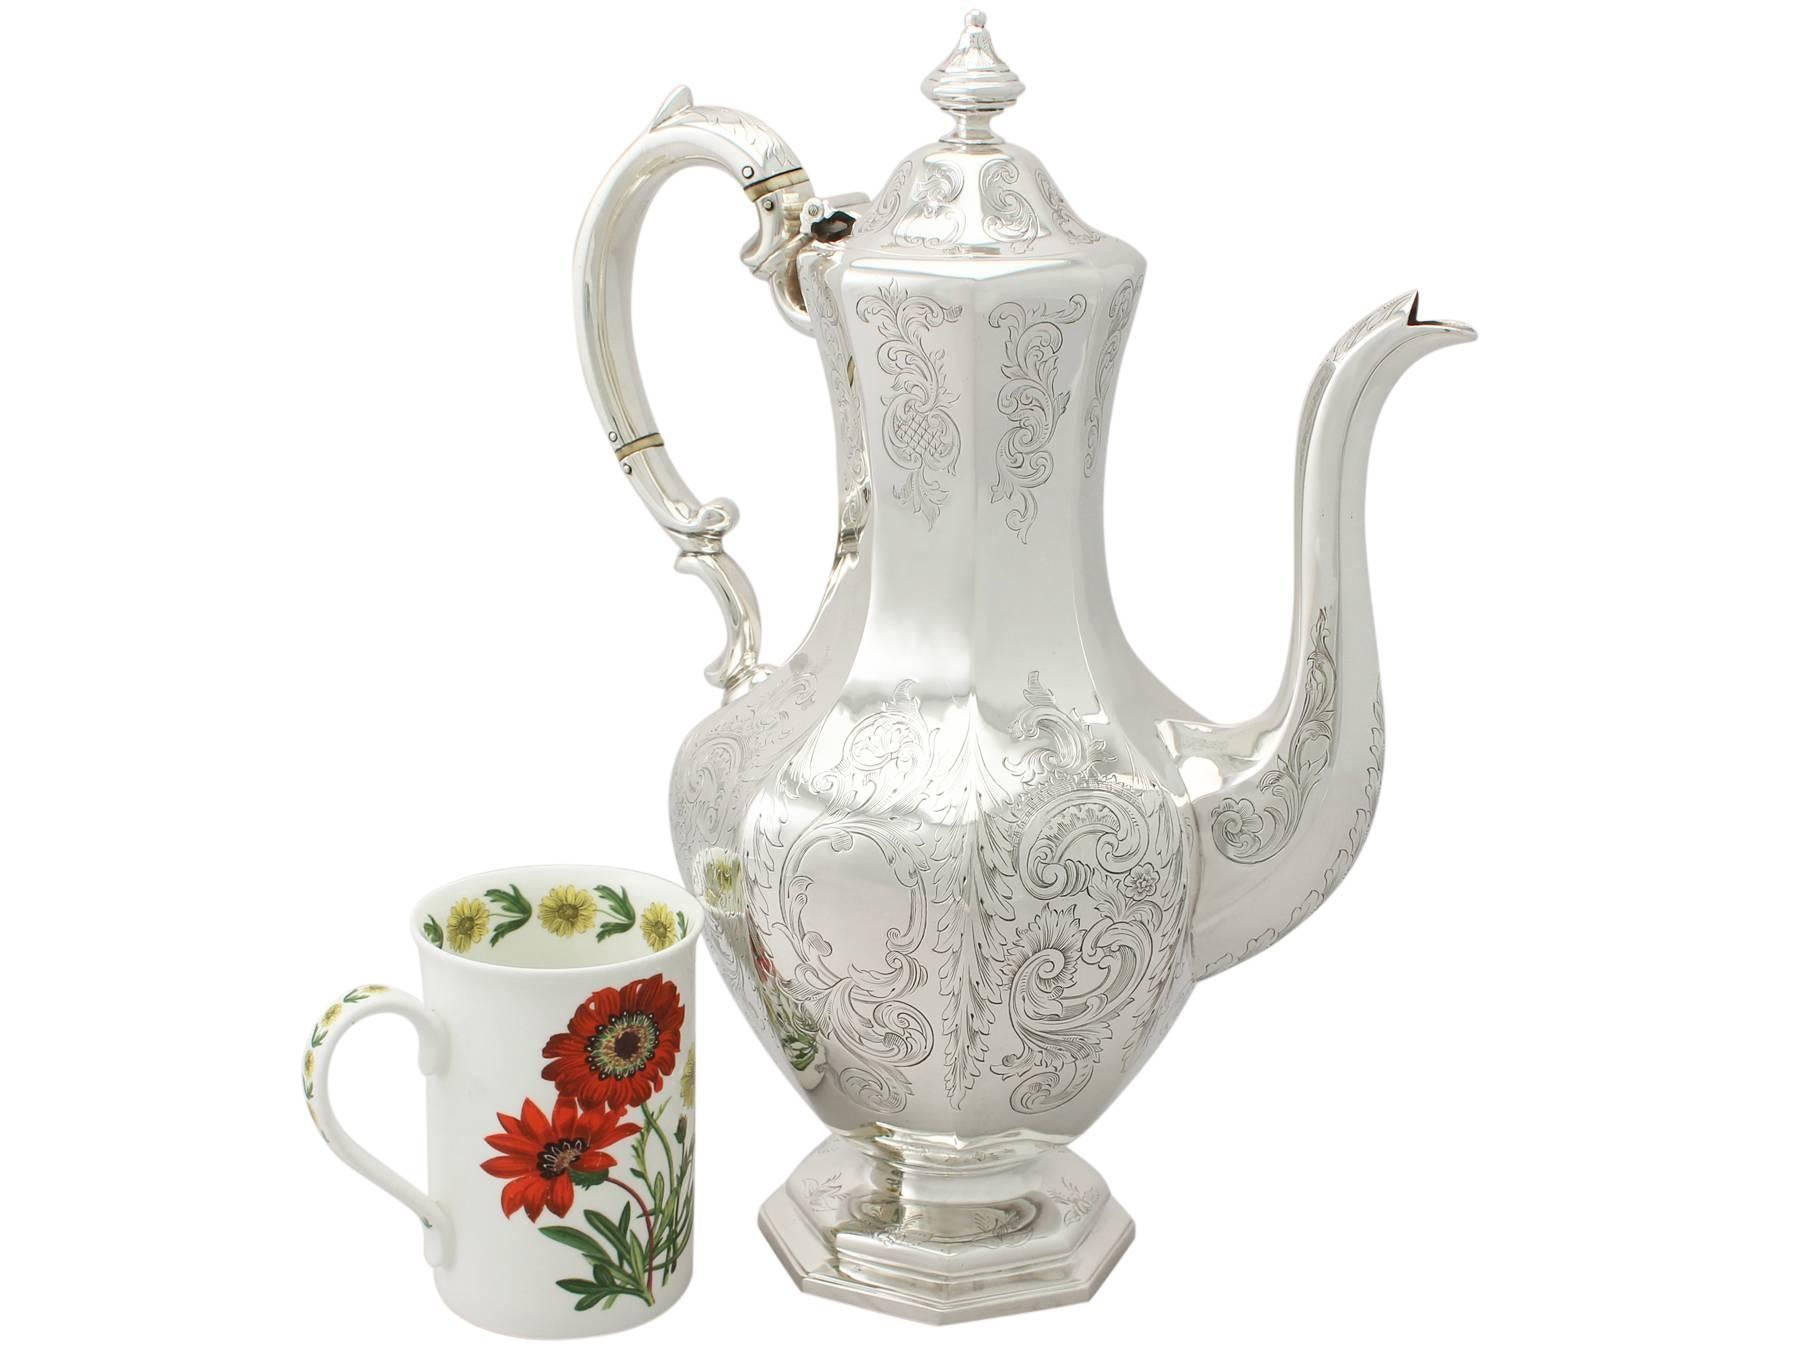 An exceptional, fine and impressive, large antique early Victorian Scottish sterling silver coffee pot; part of our silverware collection

This exceptional, early Victorian Scottish sterling silver coffee pot has an octagonal panelled baluster